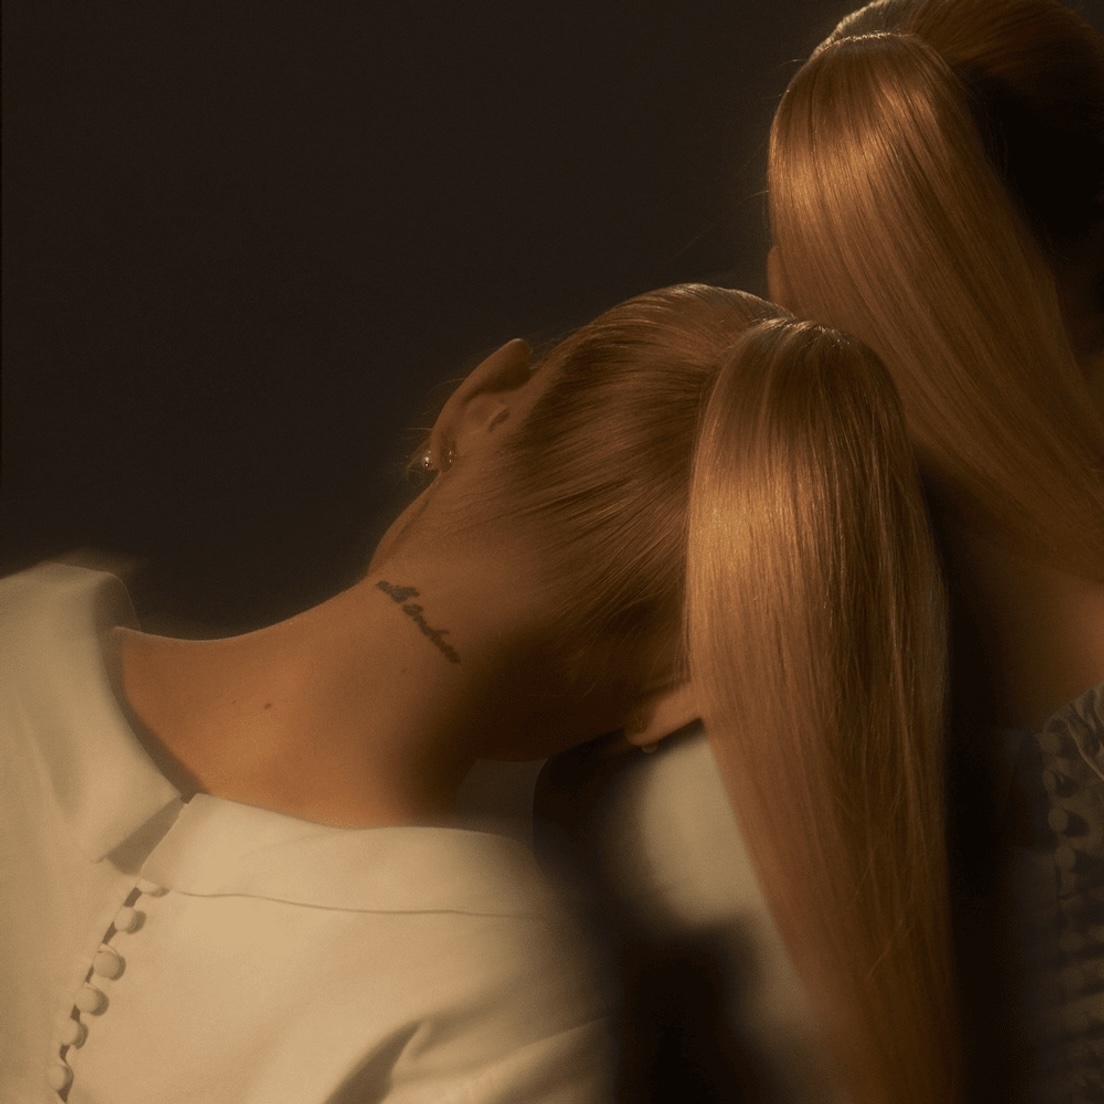 Two individuals with long, smooth hair tied back in ponytails, one person has a tattoo on the back of their neck. Their clothing style is minimalistic and formal